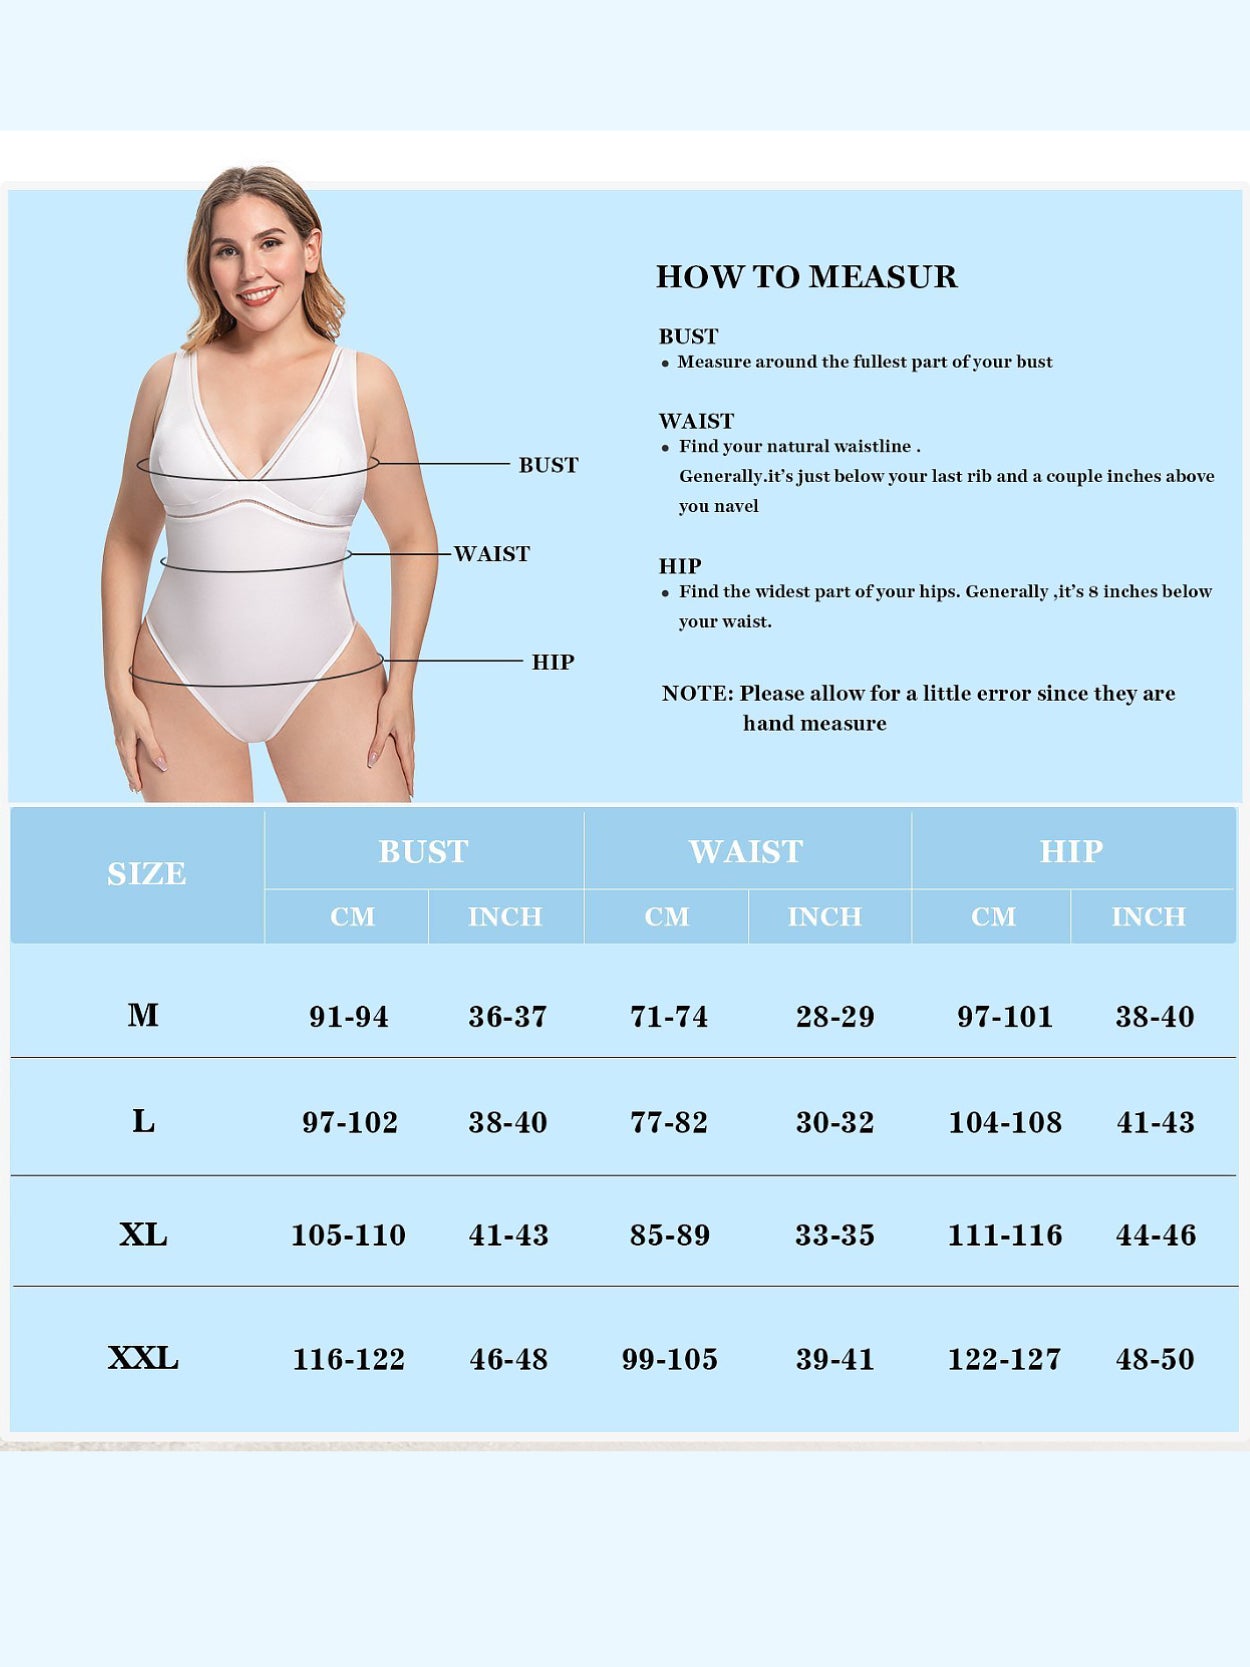 Size 30 Swimsuits, Swimming Costumes